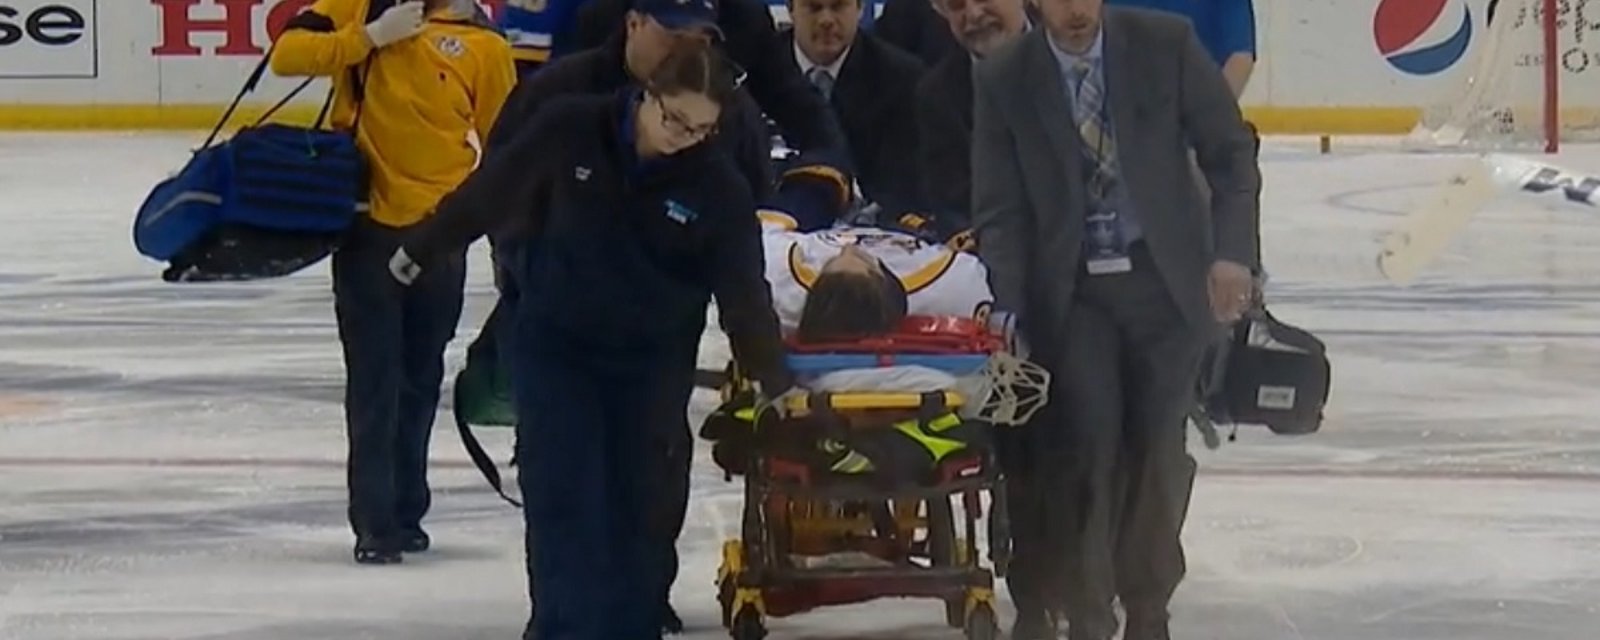 Breaking: Stretcher comes out as NHL player is badly hurt on Wednesday night.